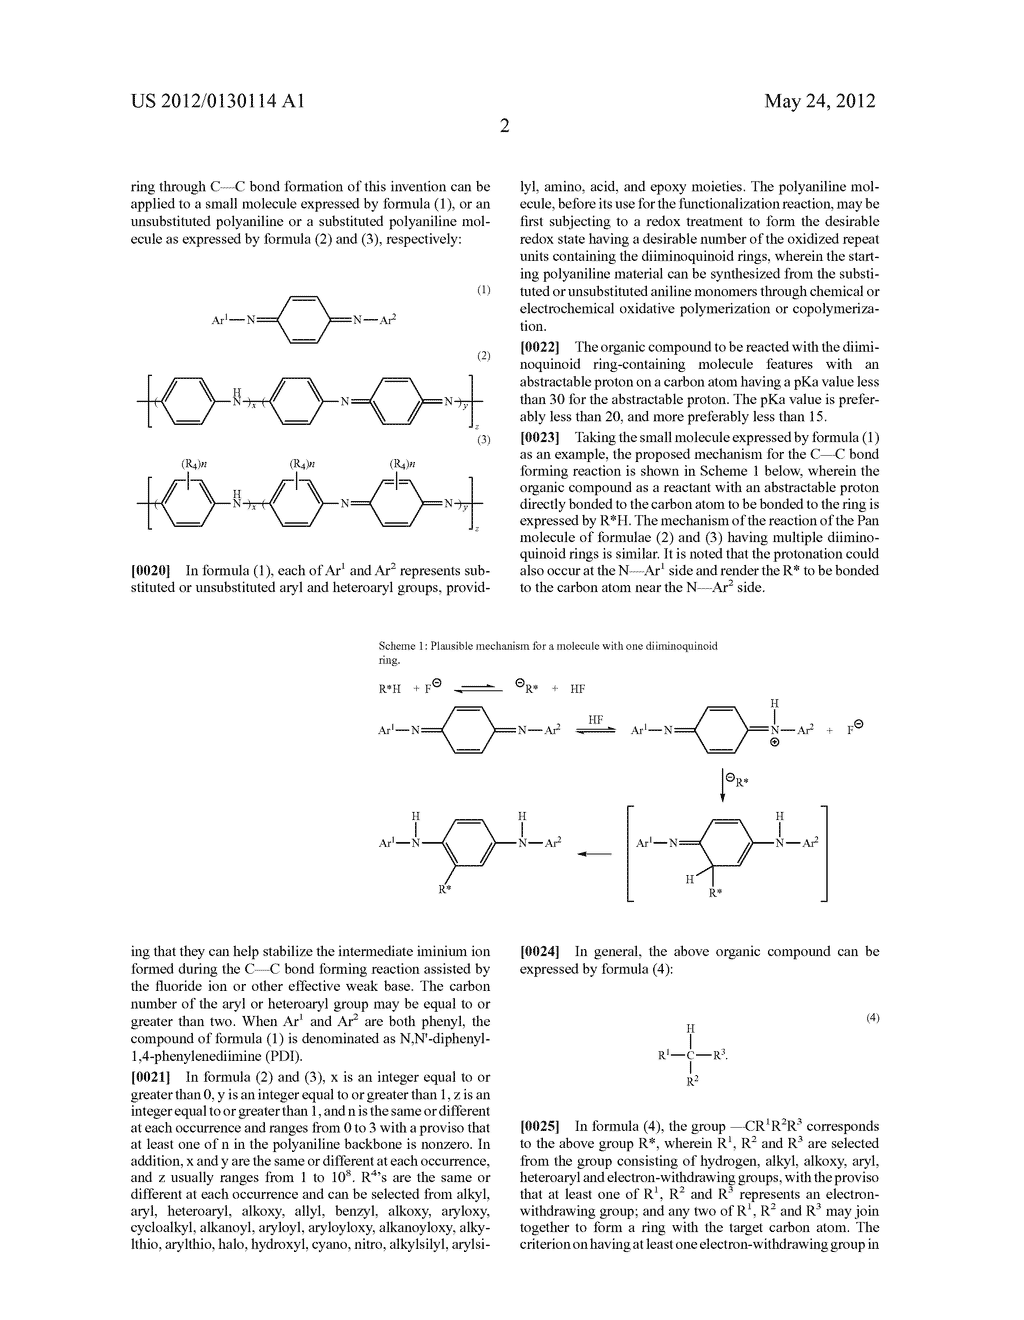 METHOD FOR DIRECT FUNCTIONALIZATION OF POLYANILINE AND OTHER MOLECULES     HAVING DIIMINOQUINOID RING VIA C-C BOND FORMATION, AND PRODUCT YIELDED     THEREWITH - diagram, schematic, and image 03